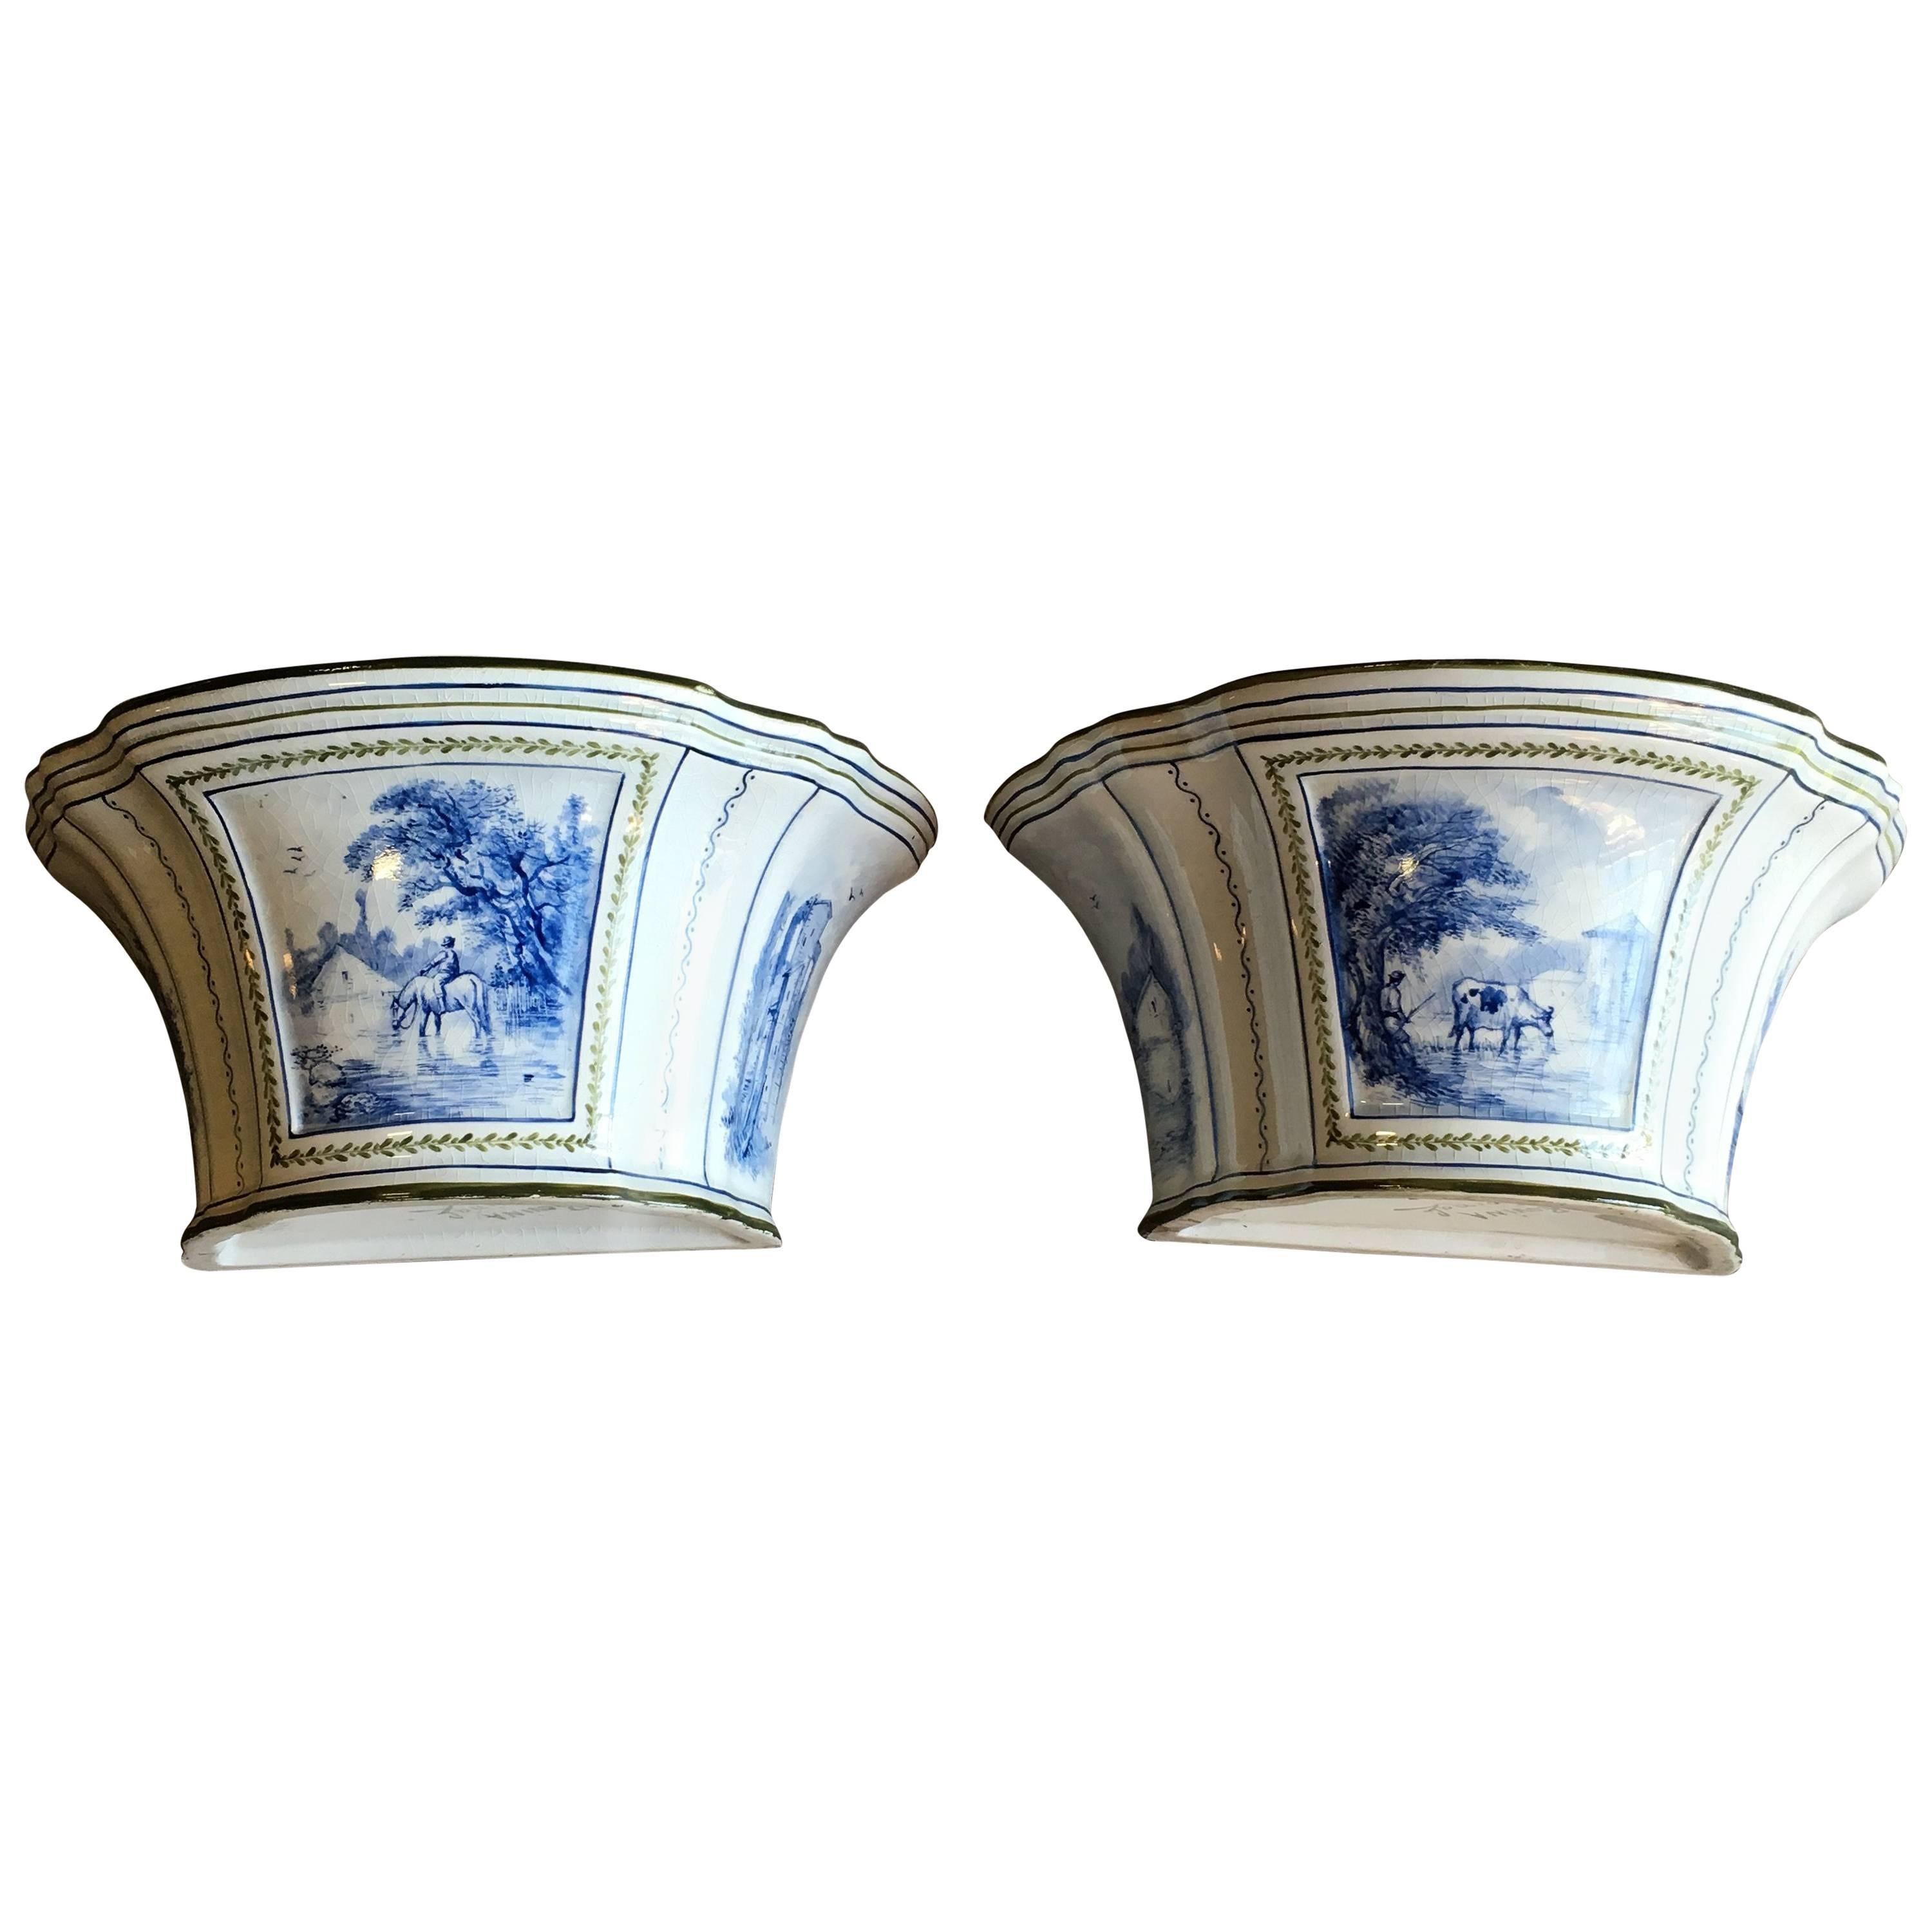 Pair of Porcelain Bouquetieres, Signed "Rovina Epinal"